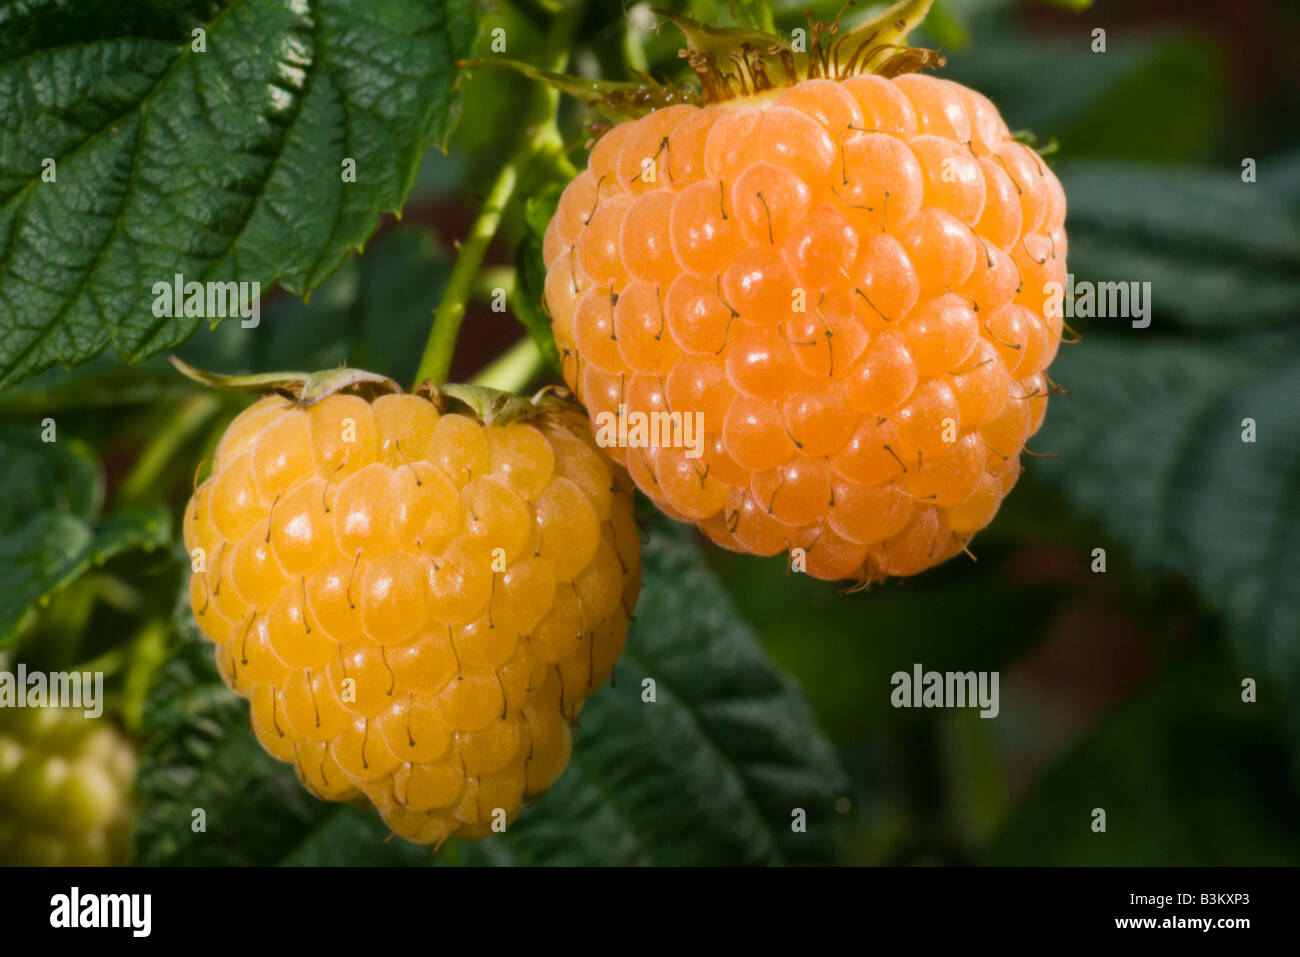 Alamy images hi-res Canes stock and raspberries Page - 2 photography -